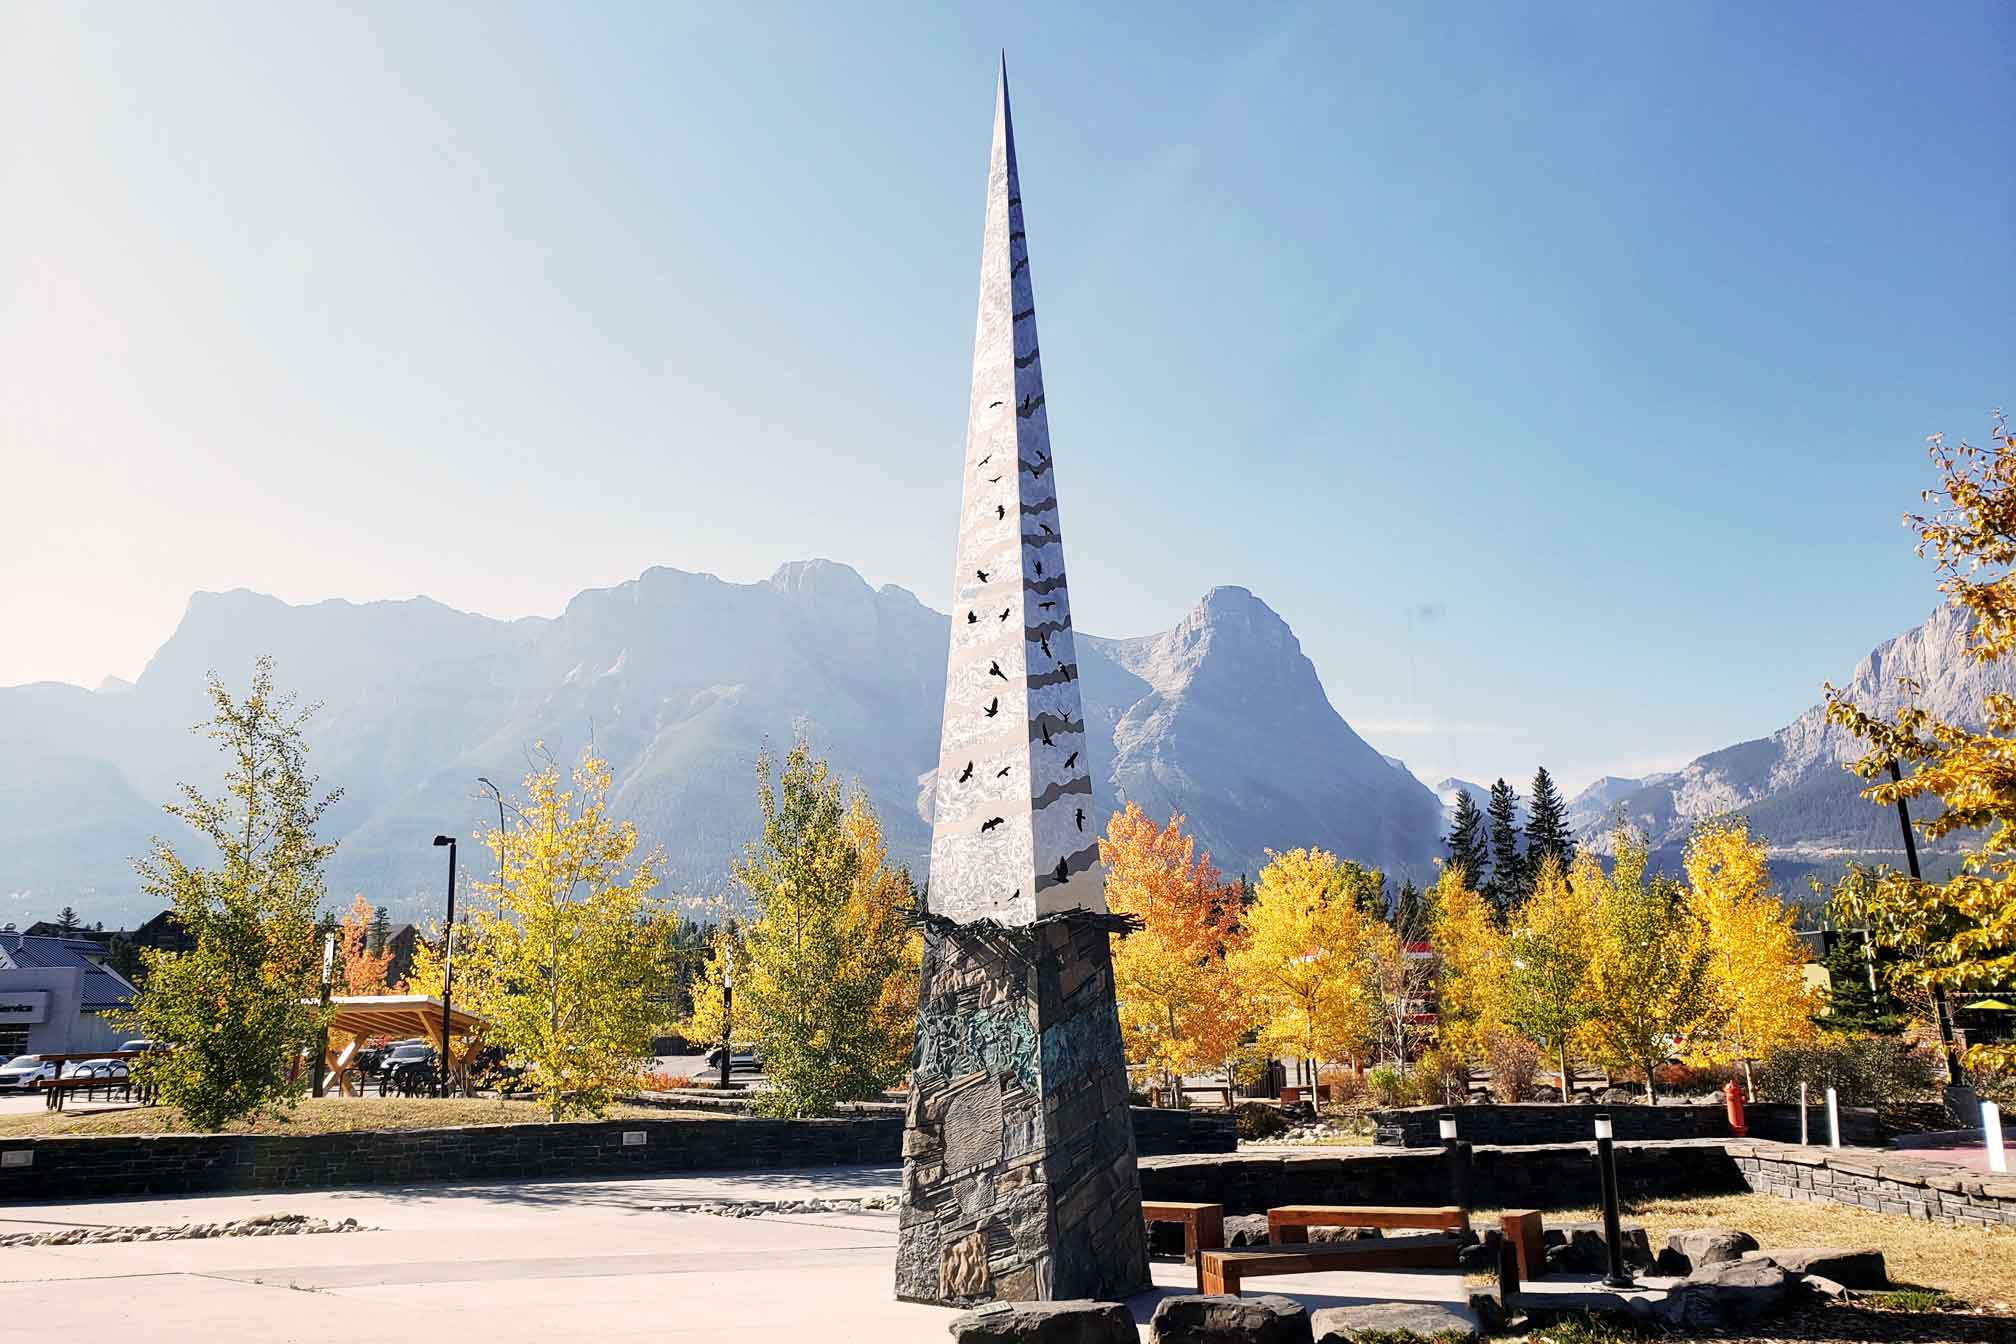 Touchstone, a piece of public art in Canmore